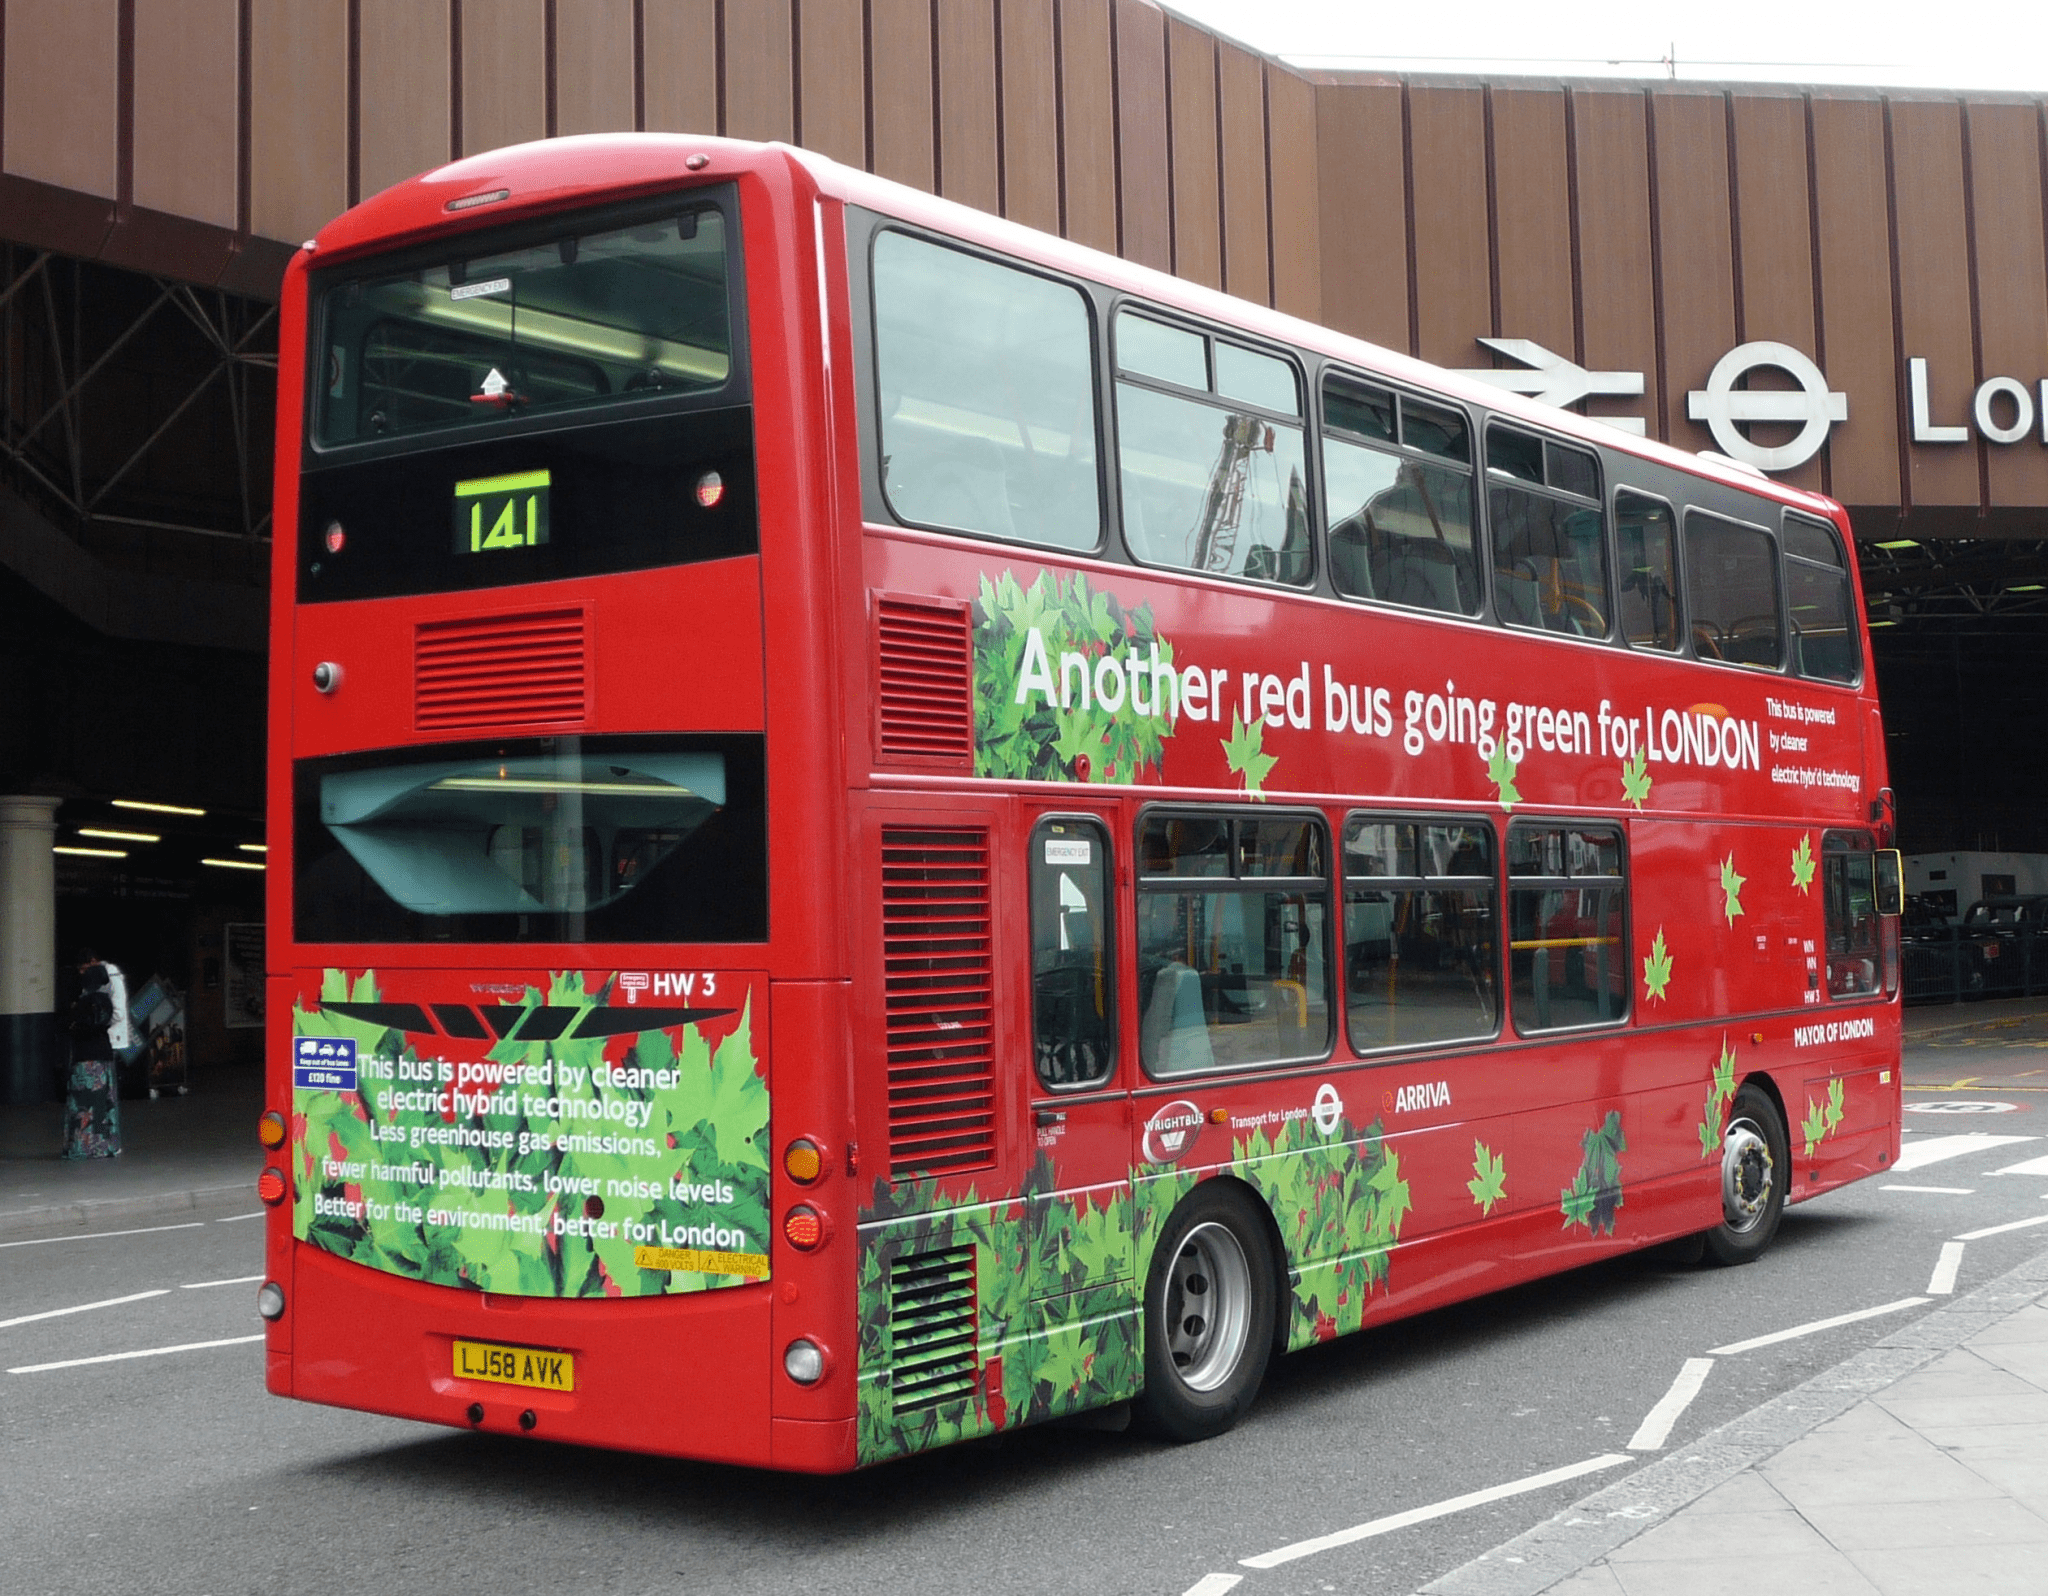 A bright red, hybrid double decker moves down a London street